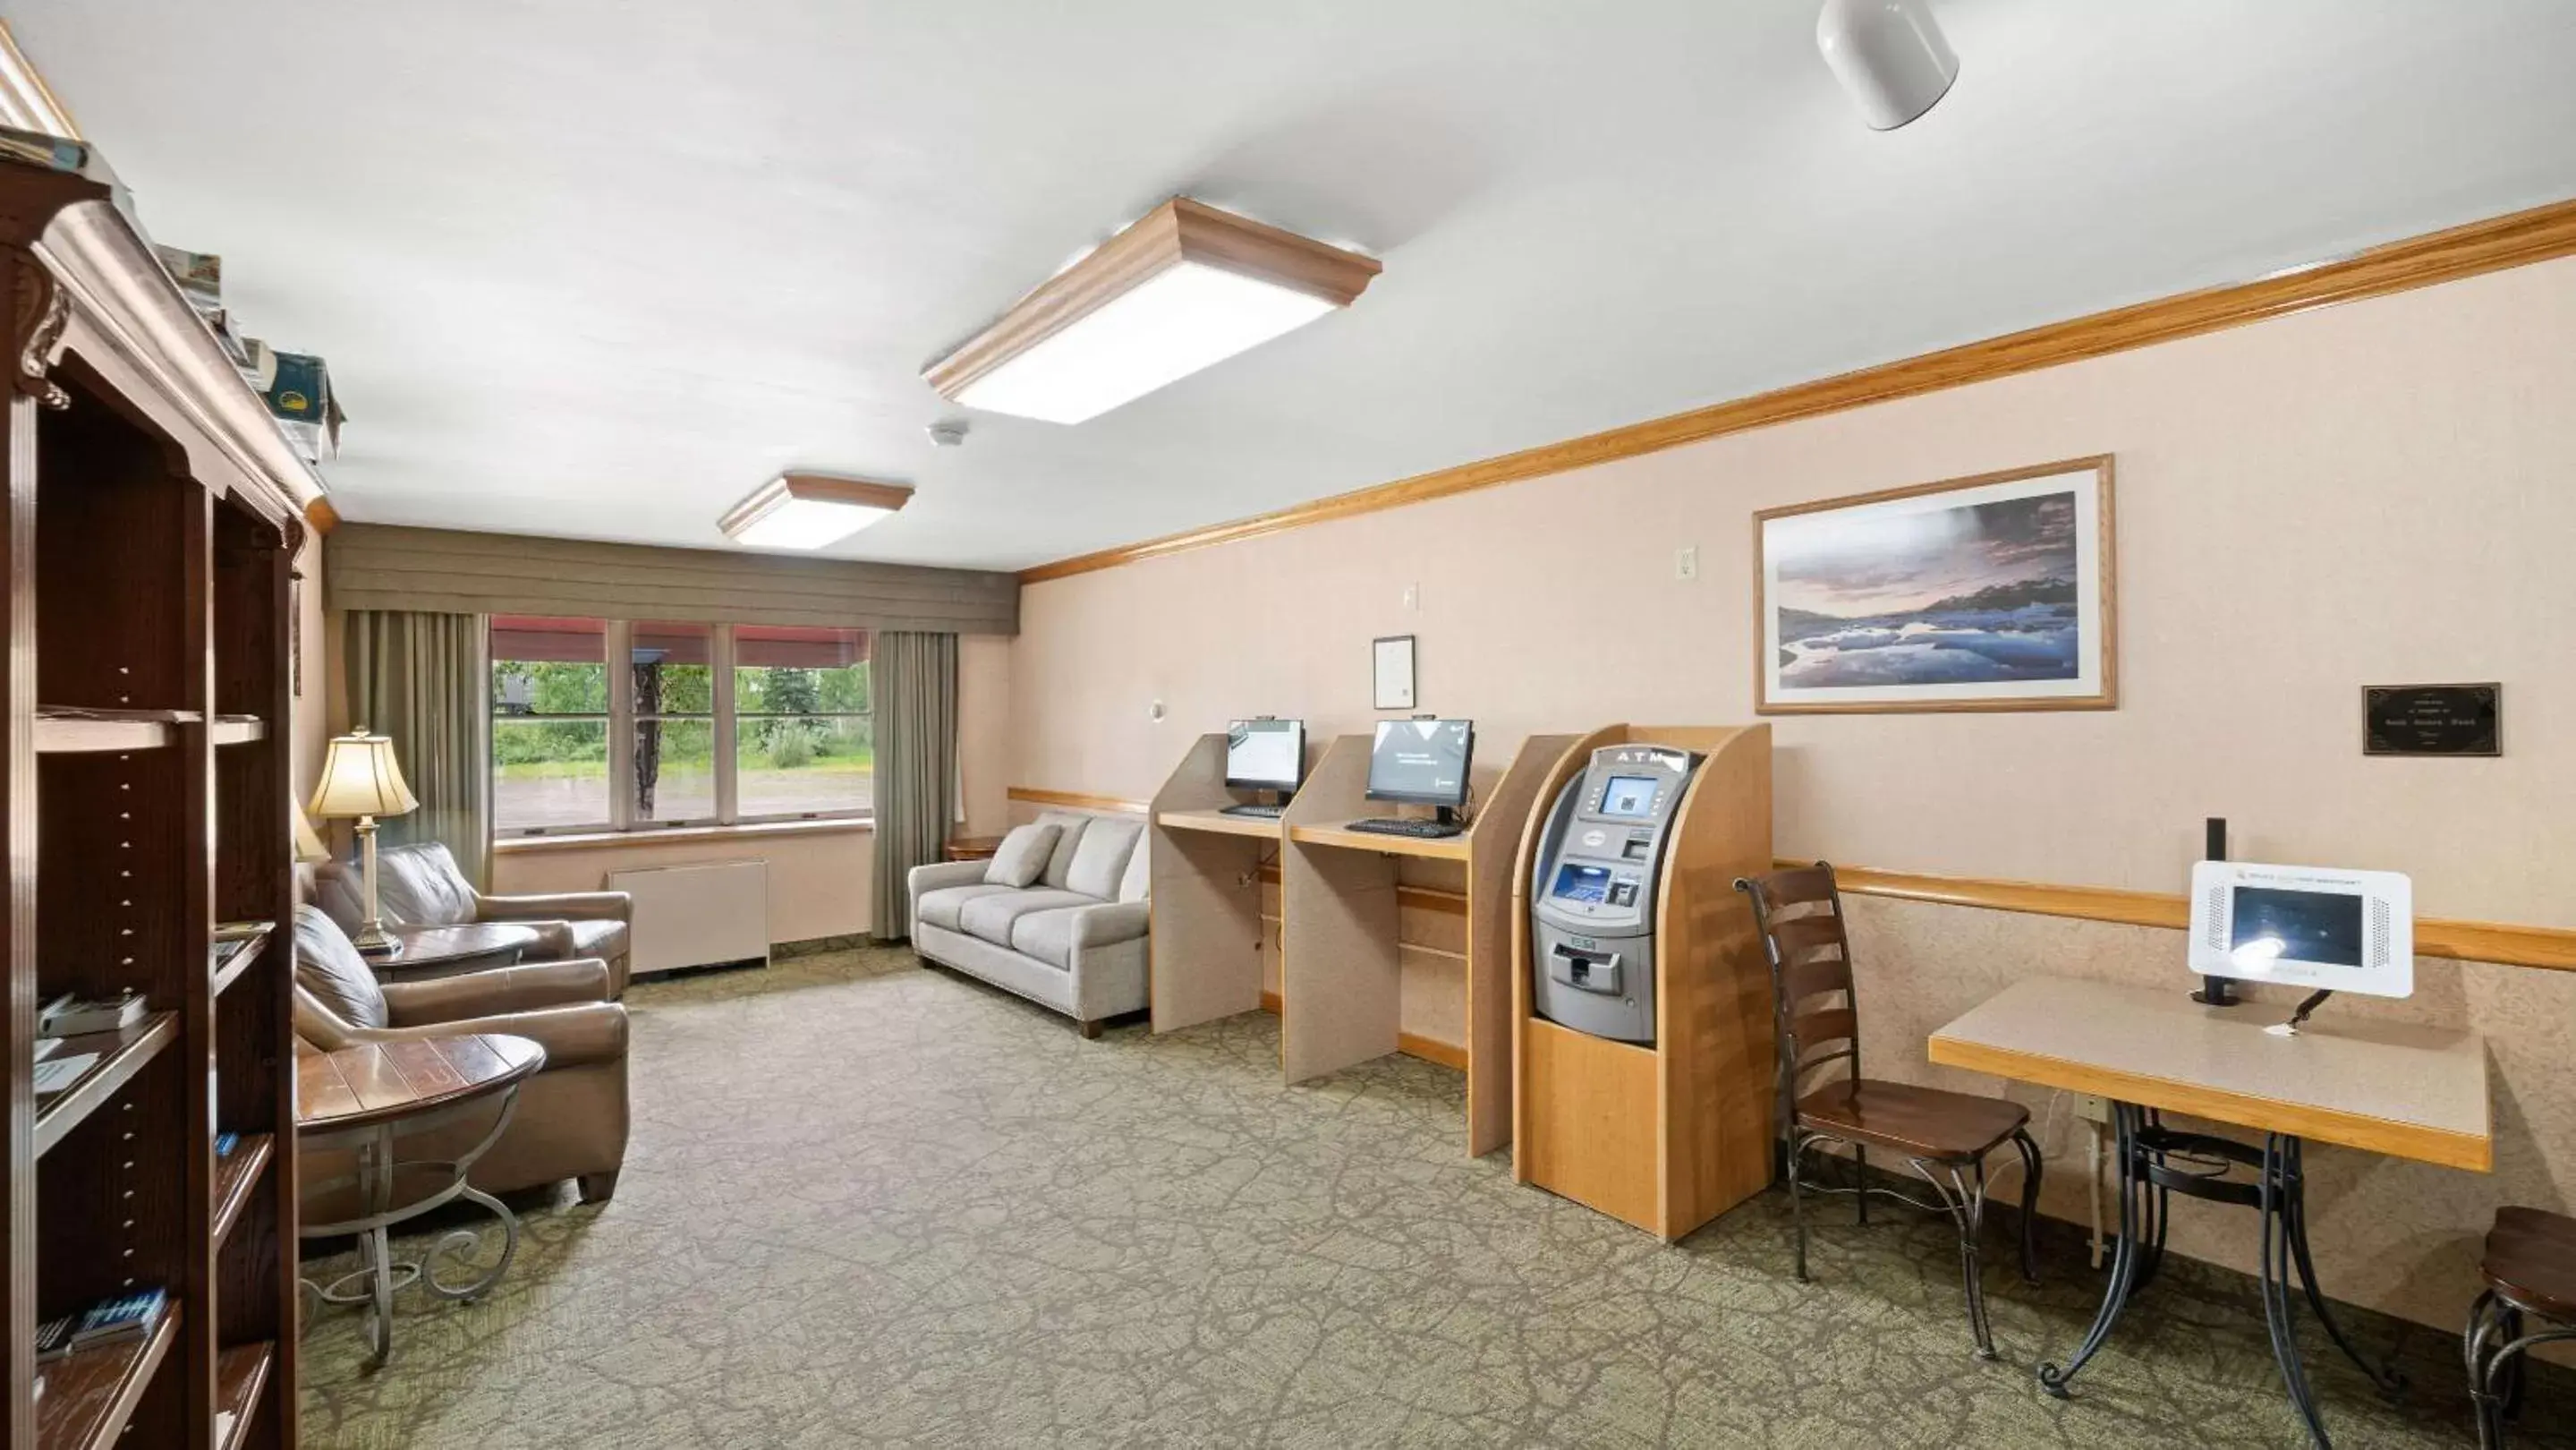 Lobby or reception in Clarion Hotel & Suites Fairbanks near Ft. Wainwright